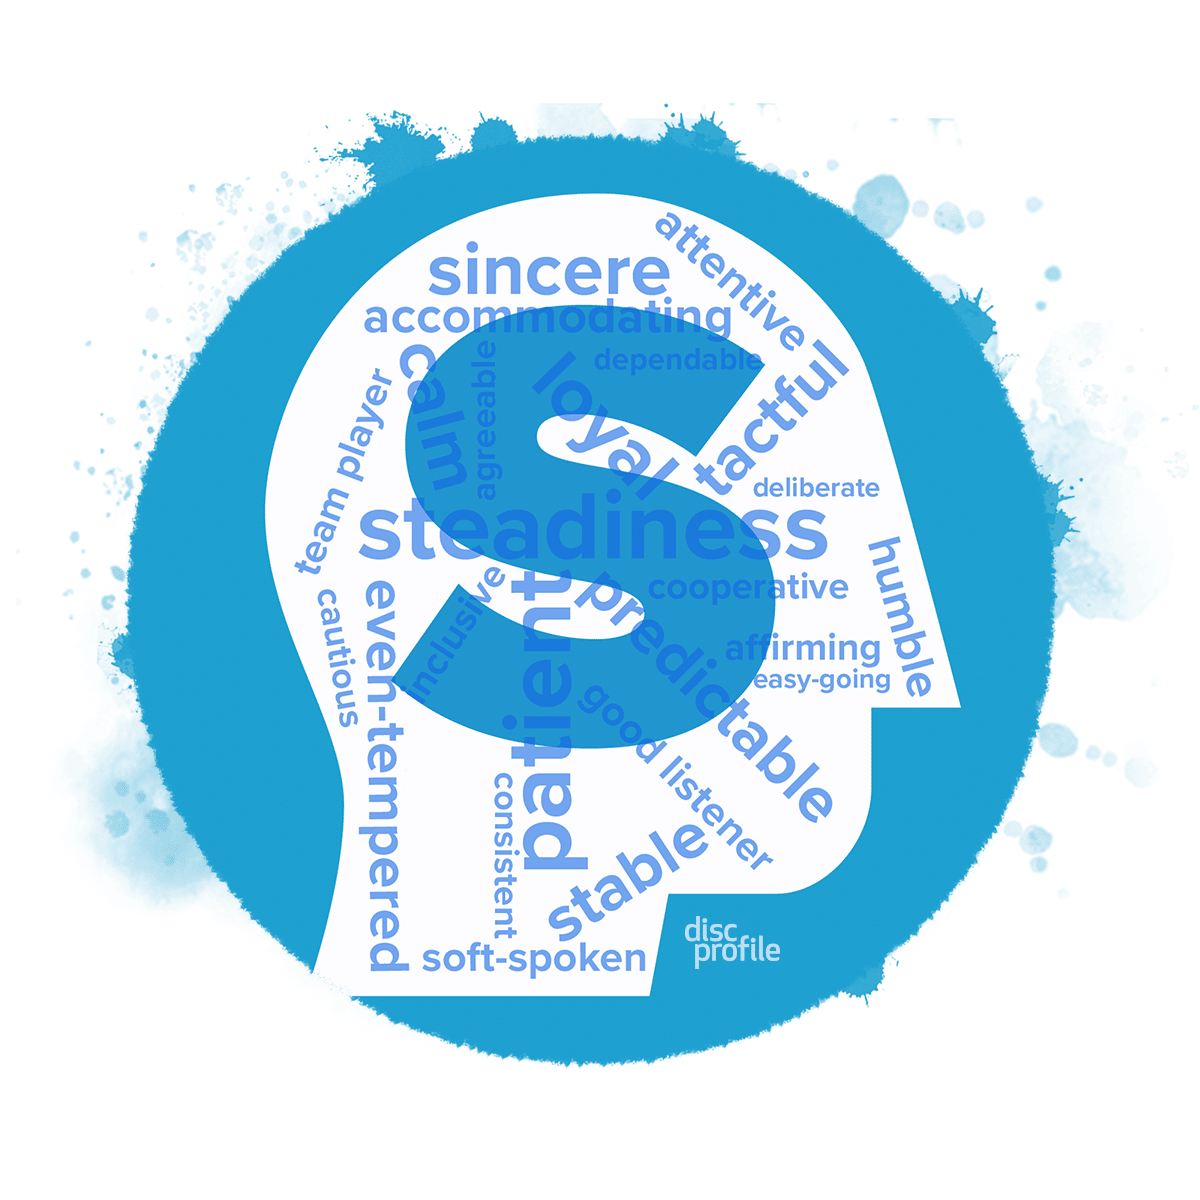 An S-style word cloud in a silhouette of a person’s head